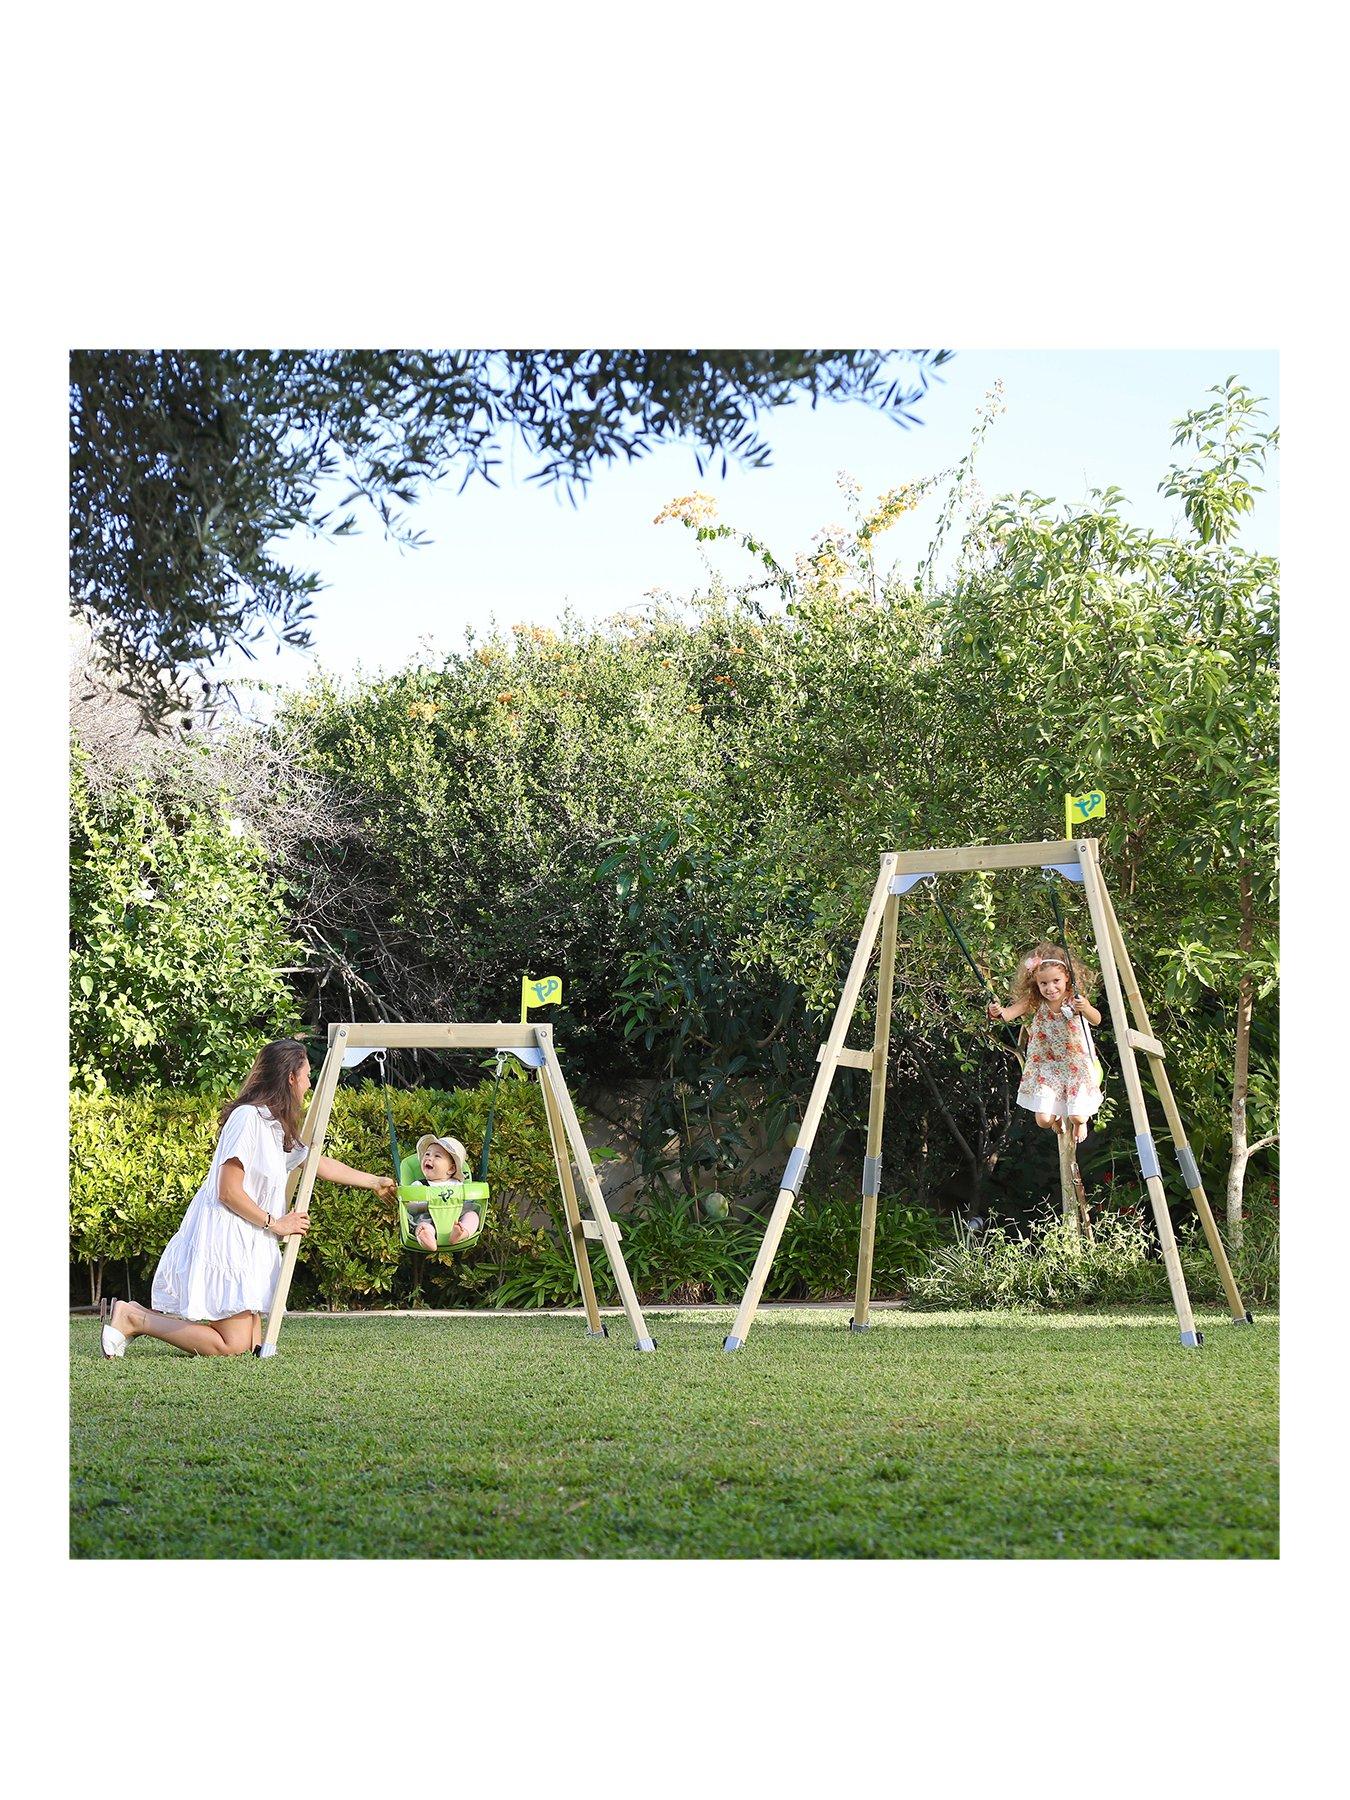 Details about   Swing Seat For kids Children Toddler Outdoor Swing Toy Play Kid Green 